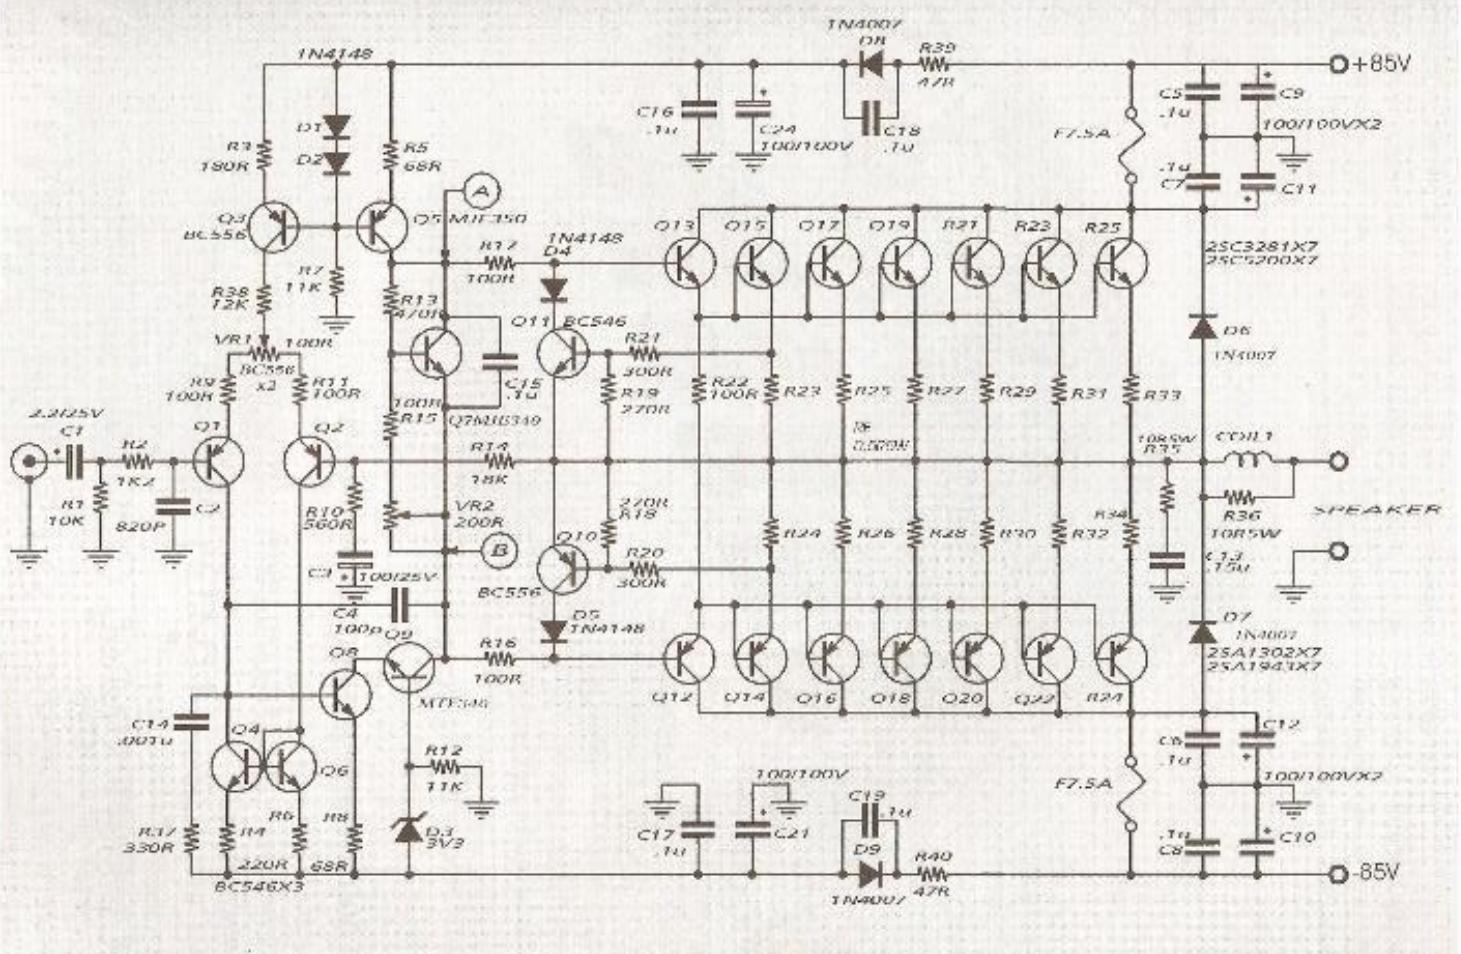 2sc 5200 Mosfet Audio Amplifire Circuit - On Schematic Above Is Describe The 600 Watt Power Amplifier Circuit And The Voltage Input Source Is About 85vdc - 2sc 5200 Mosfet Audio Amplifire Circuit